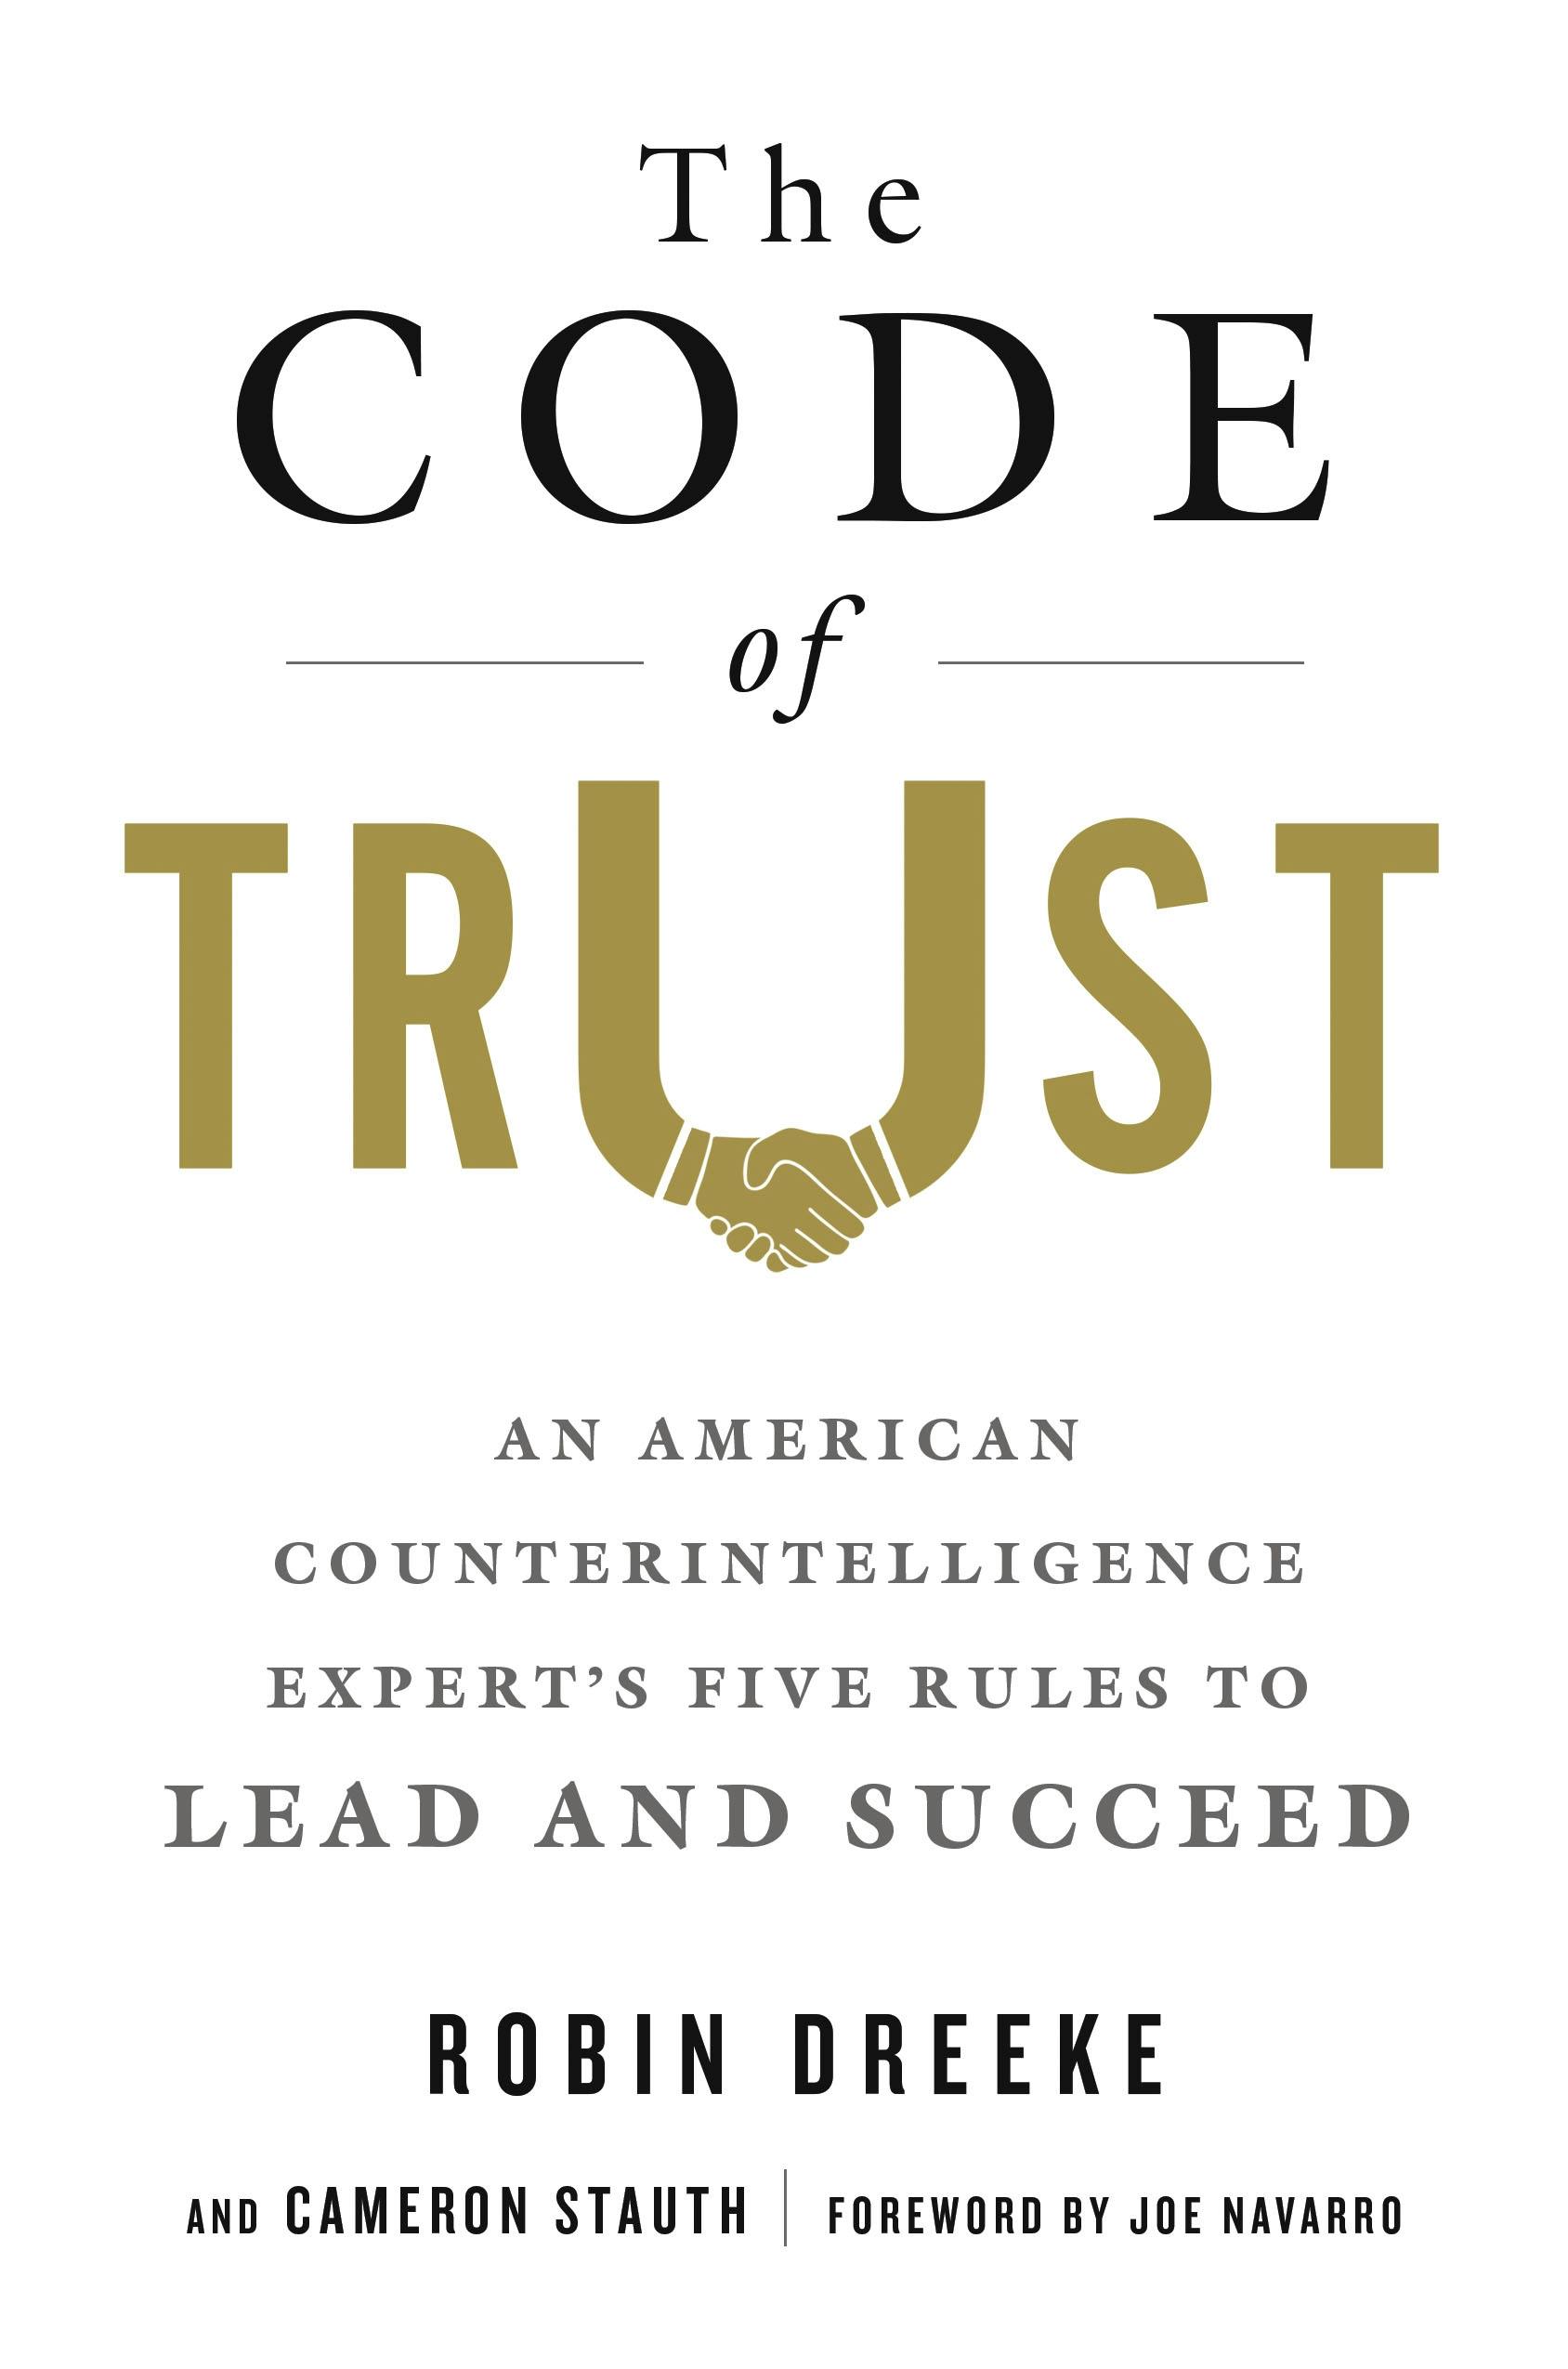 Describes for The Code of Trust by authors